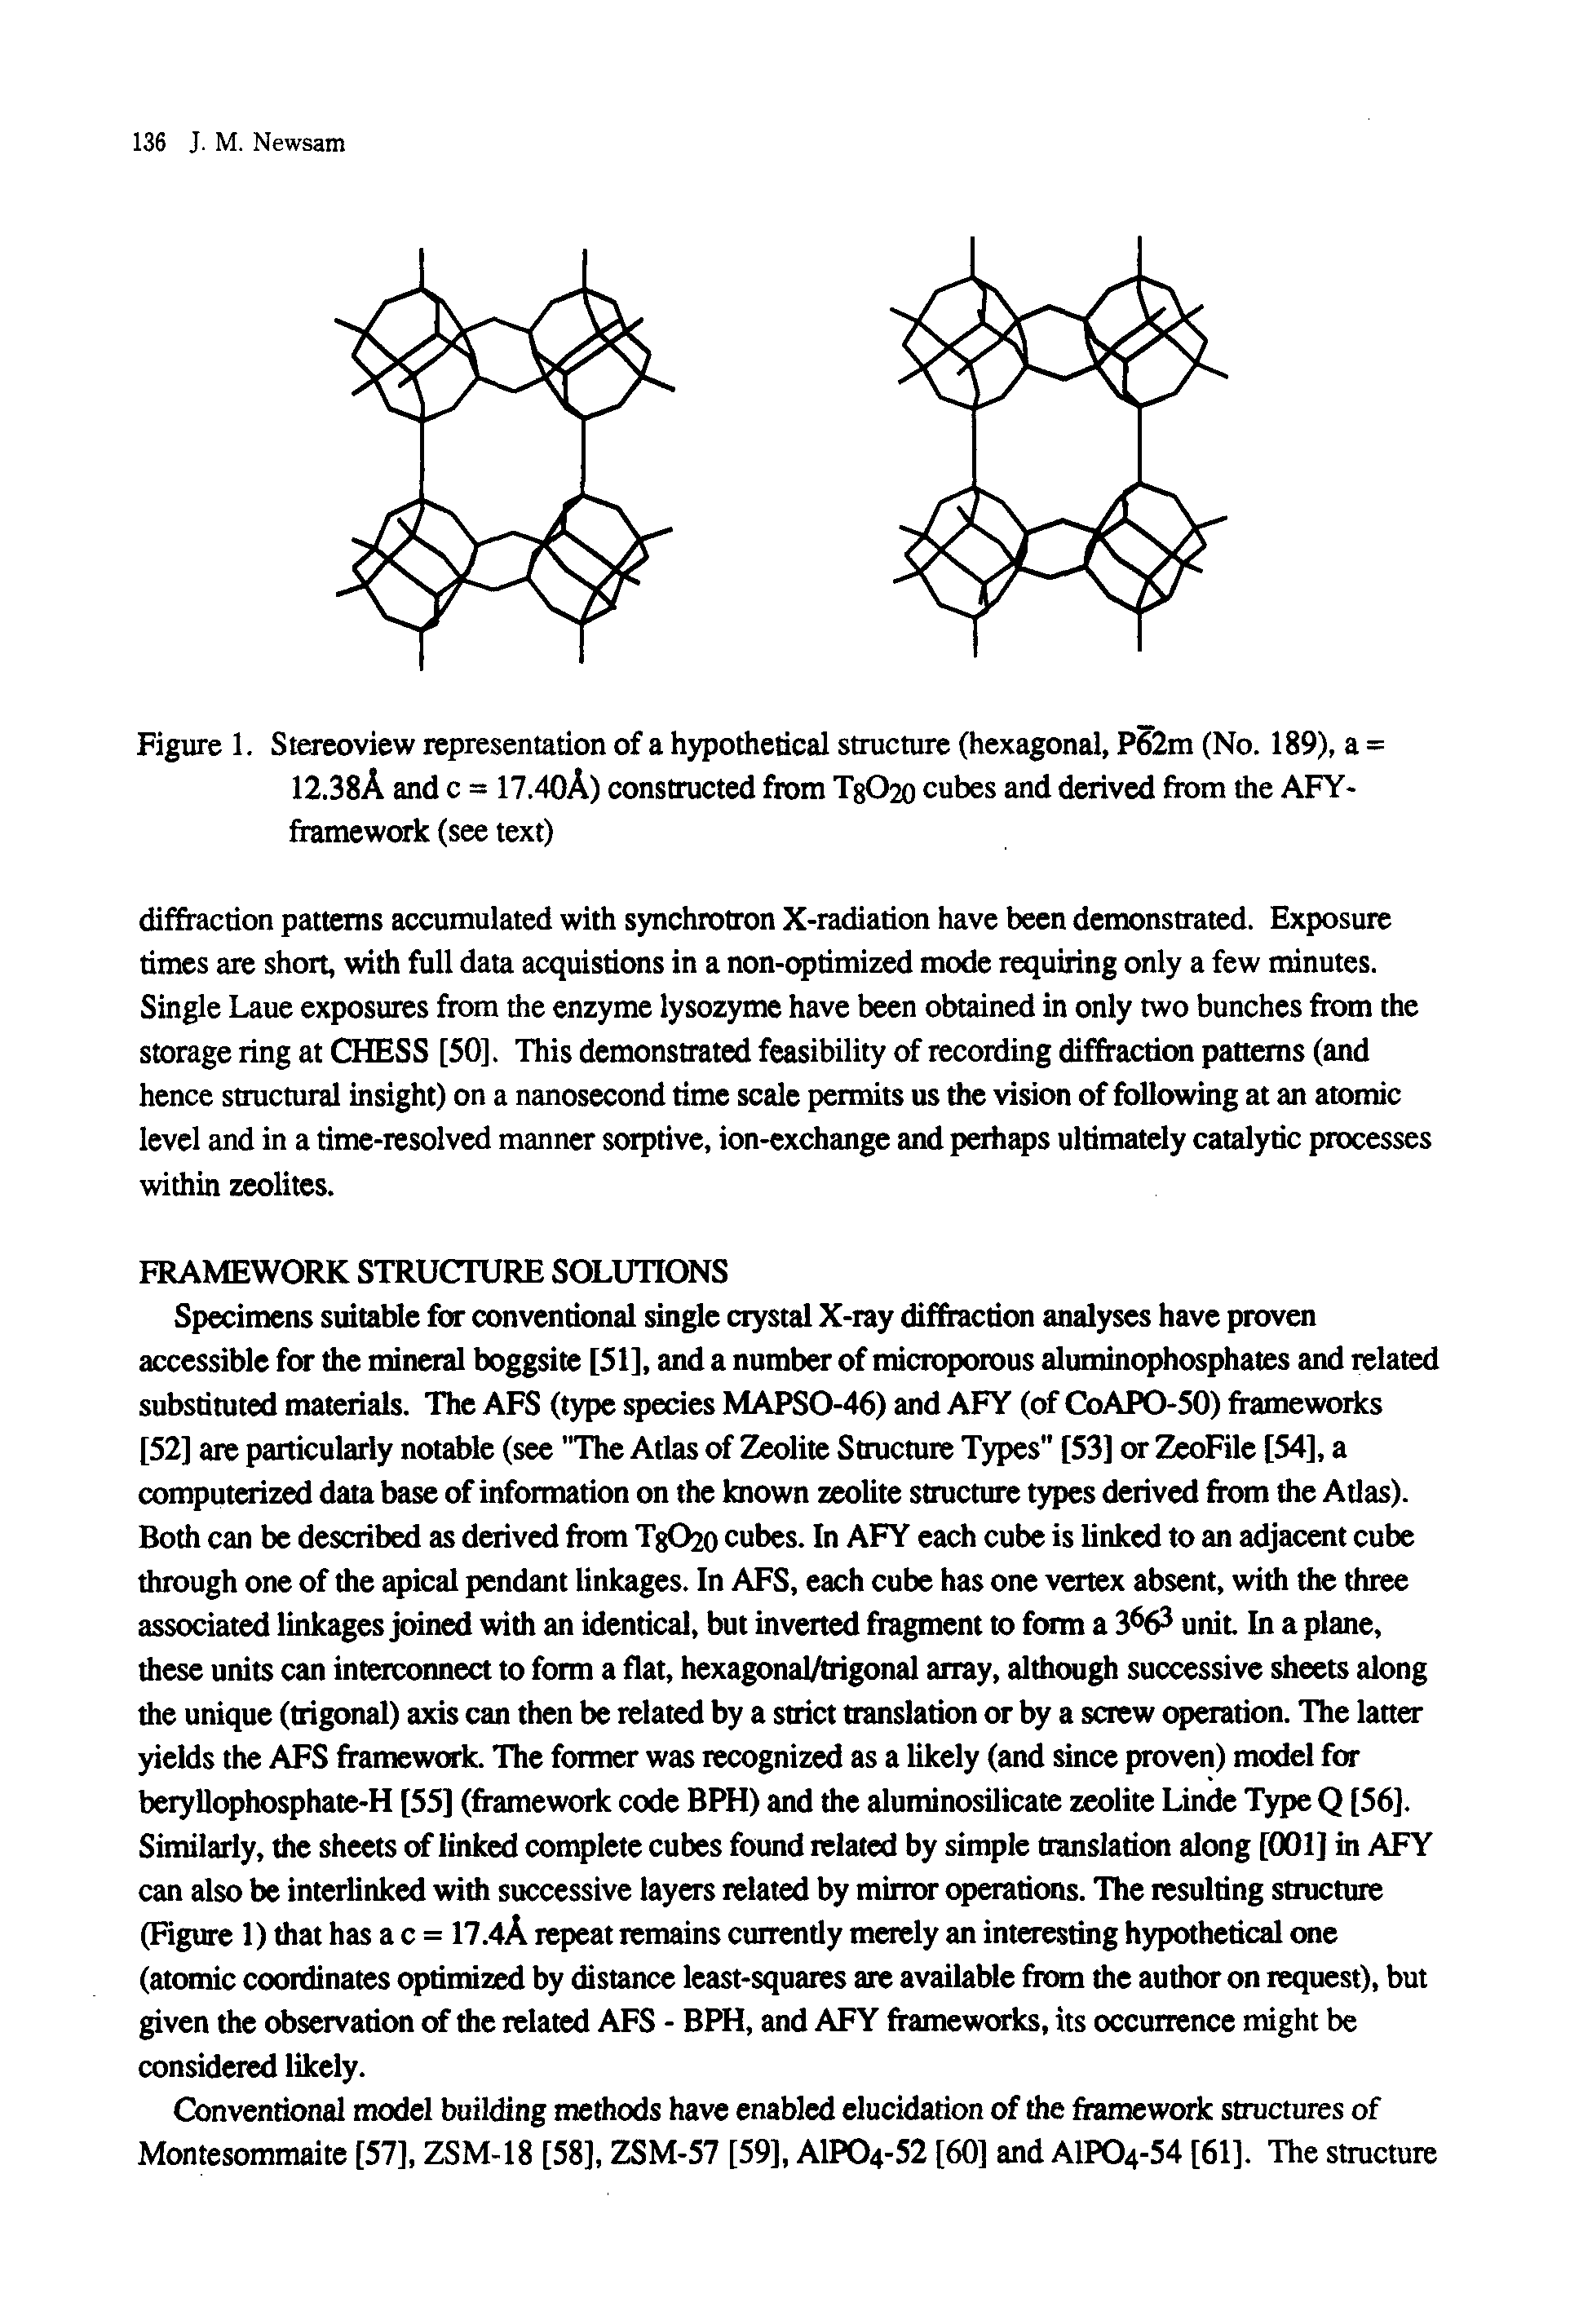 Figure 1. Stereoview representation of a hypothetical structure (hexagonal, P62m (No. 189), a = 12.38A and c = 17.40A) constructed from TgO20 cubes and derived from the AFY-framework (see text)...